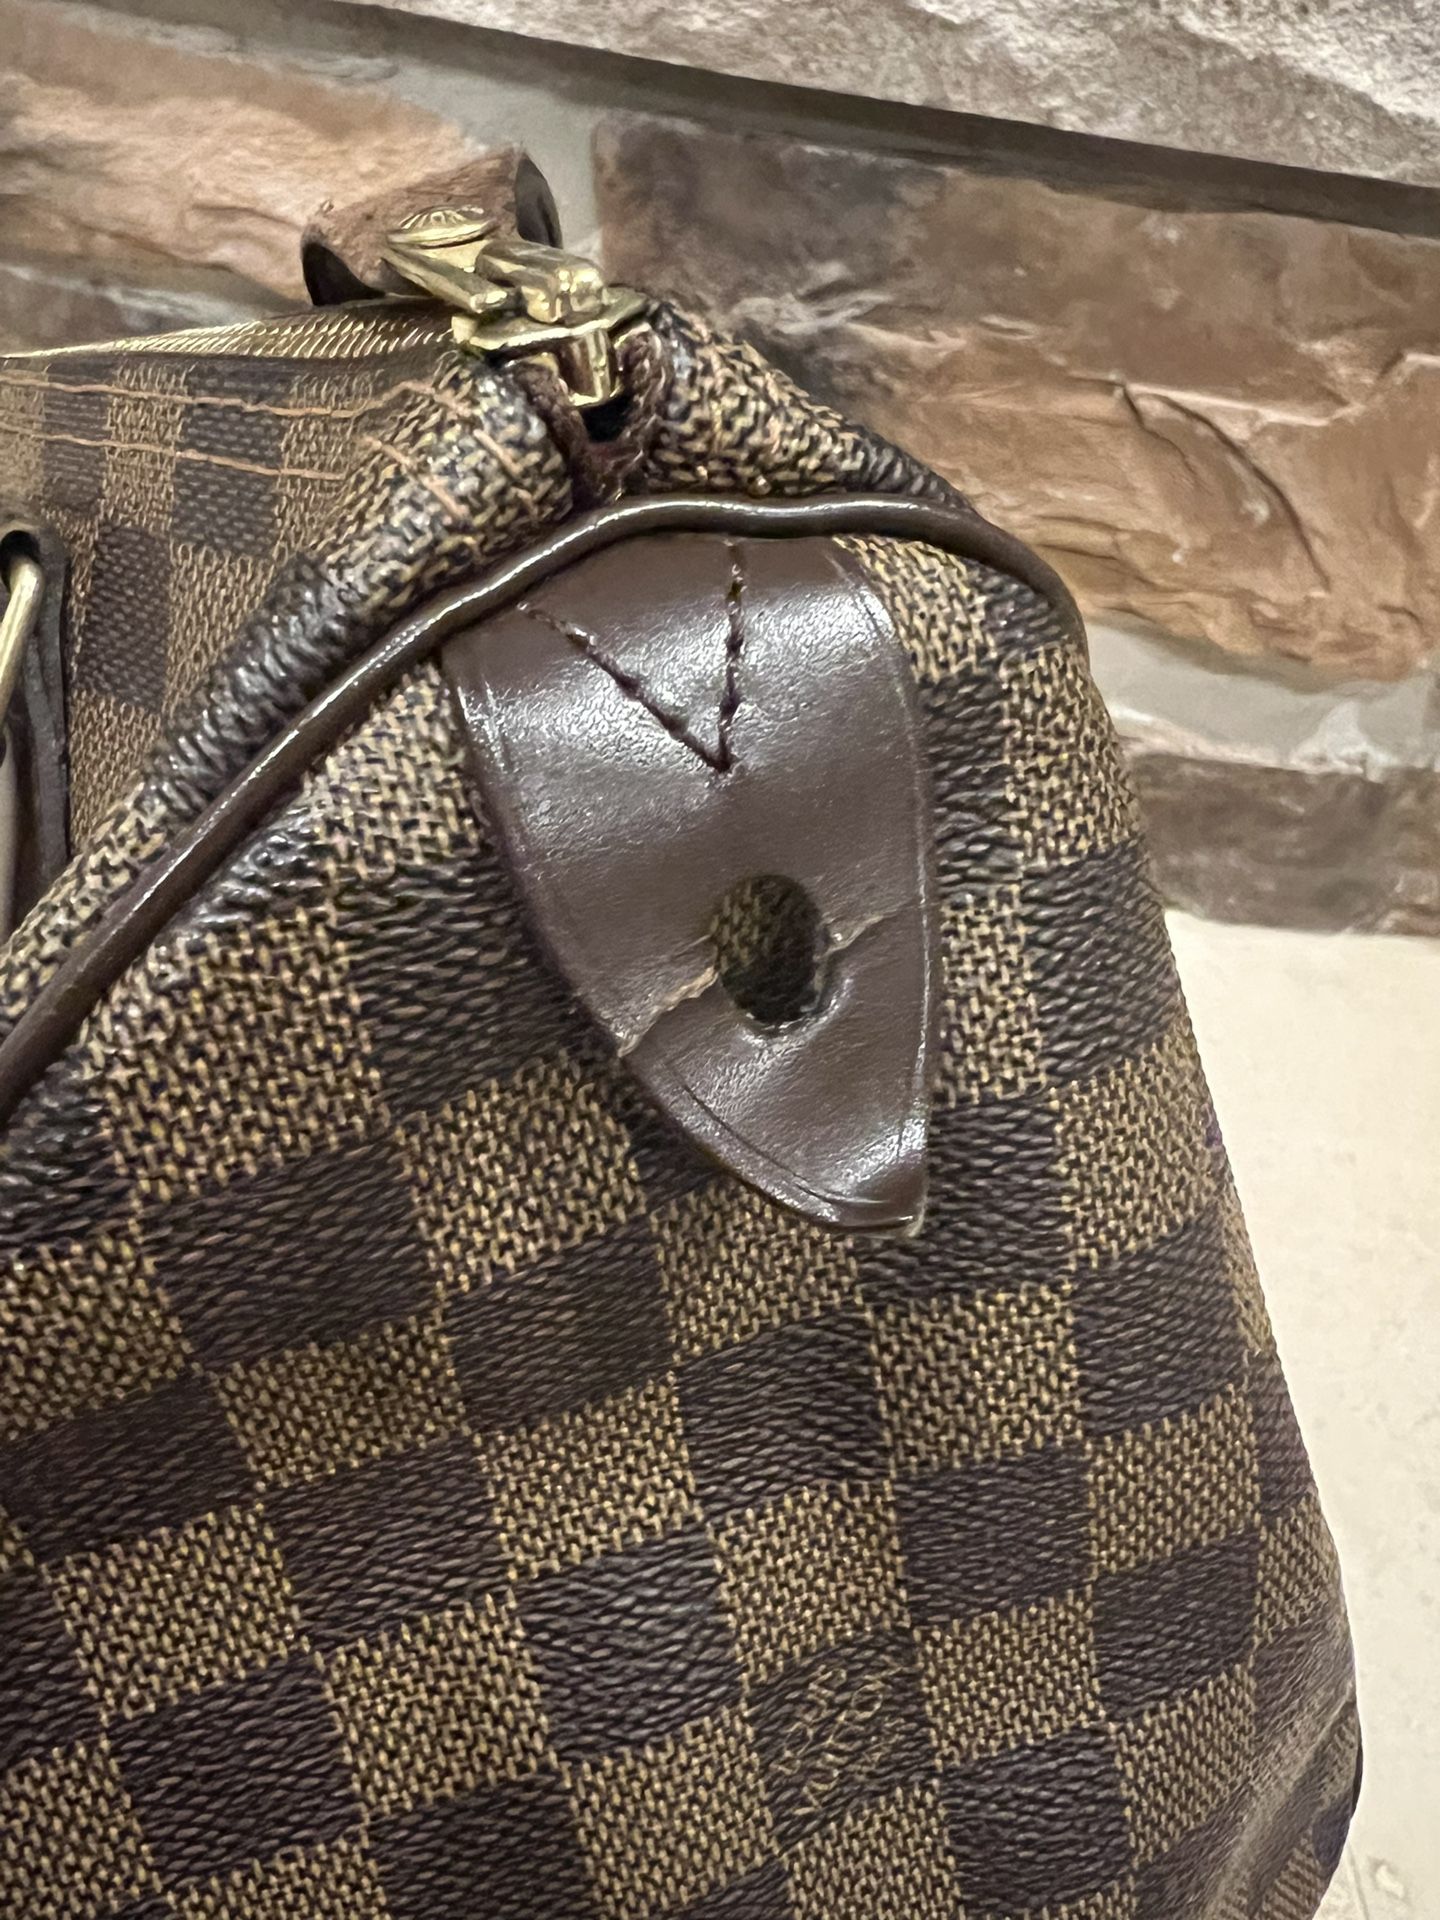 Louis Vuitton Caissa Hobo / Damier for Sale in Brooklyn, NY - OfferUp